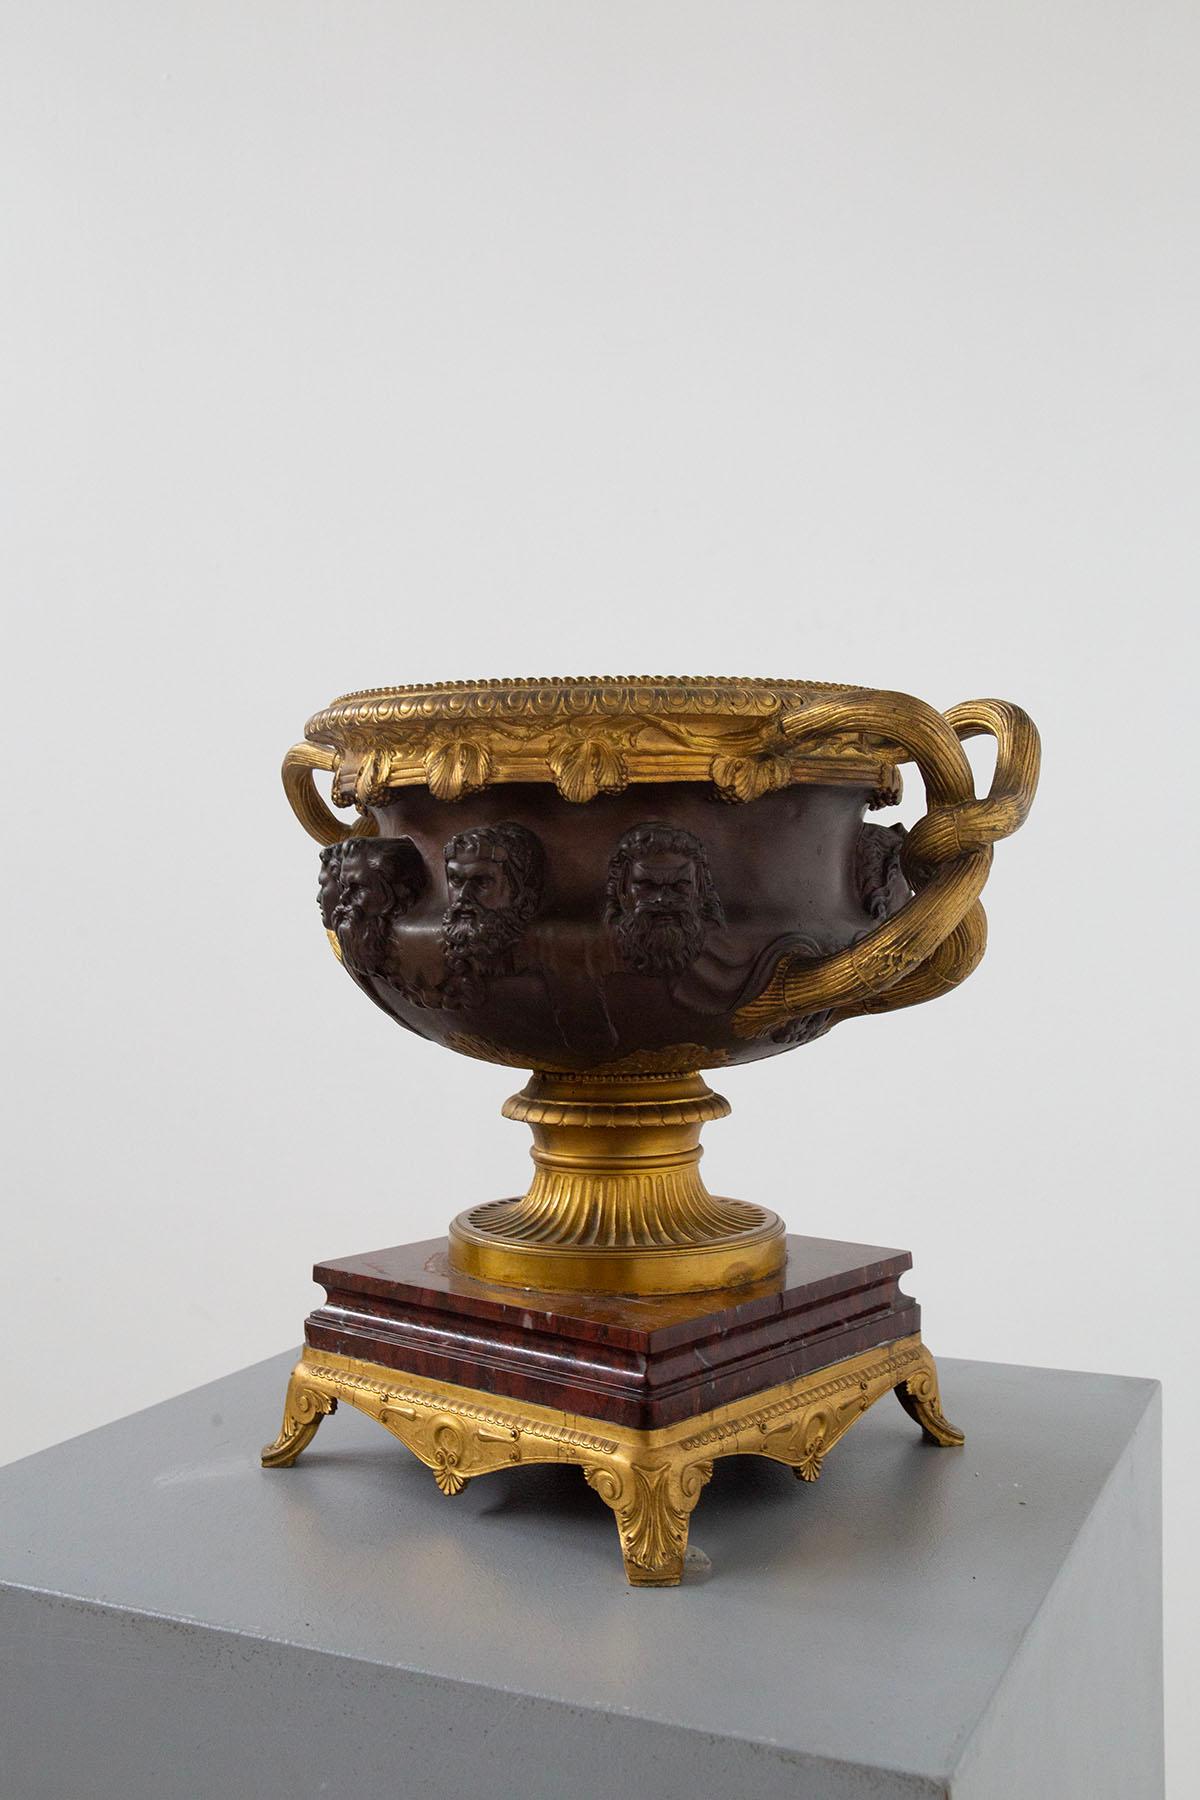 The cup or mug described is a beautiful piece by Ferdinand Barbedienne, a renowned French bronze sculptor and foundryman who lived between 1810 and 1892. Created around 1860 and known as the 'de Warwick' cup, it is a masterpiece of craftsmanship.